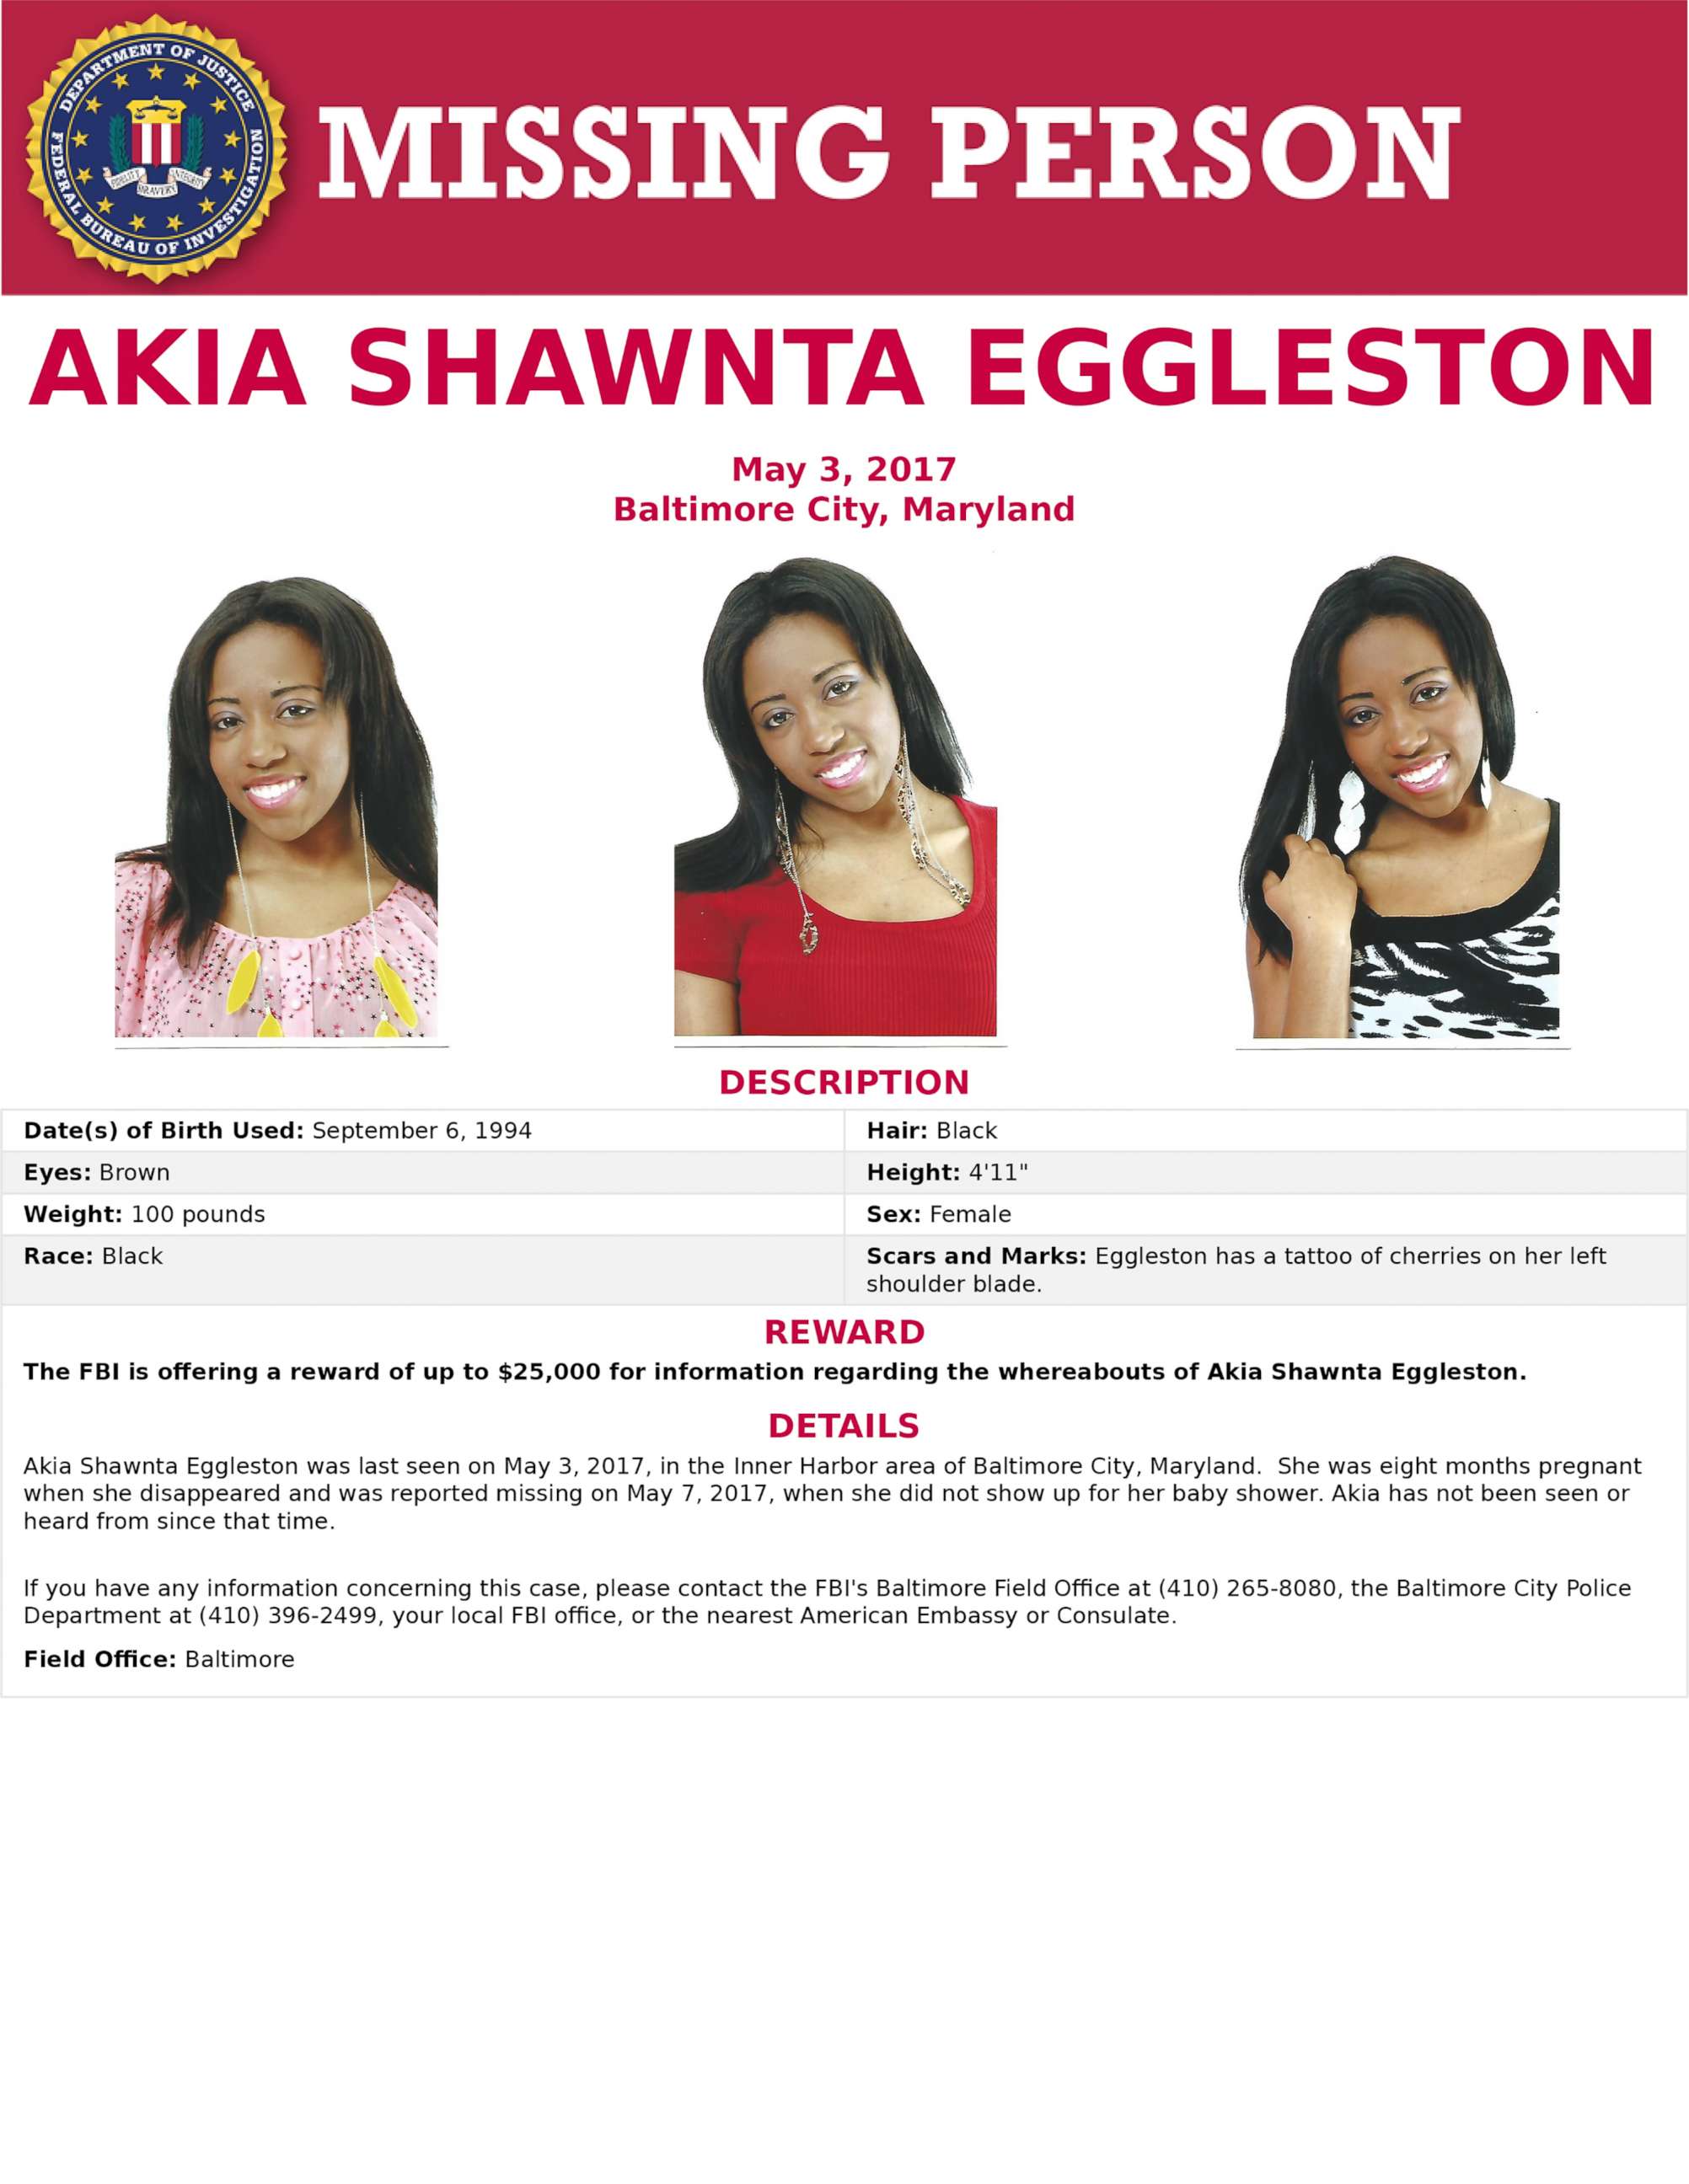 PHOTO: Akia Shawnta Eggleston was last seen on May 3, 2017, in the Inner Harbor area of Baltimore City, Md.